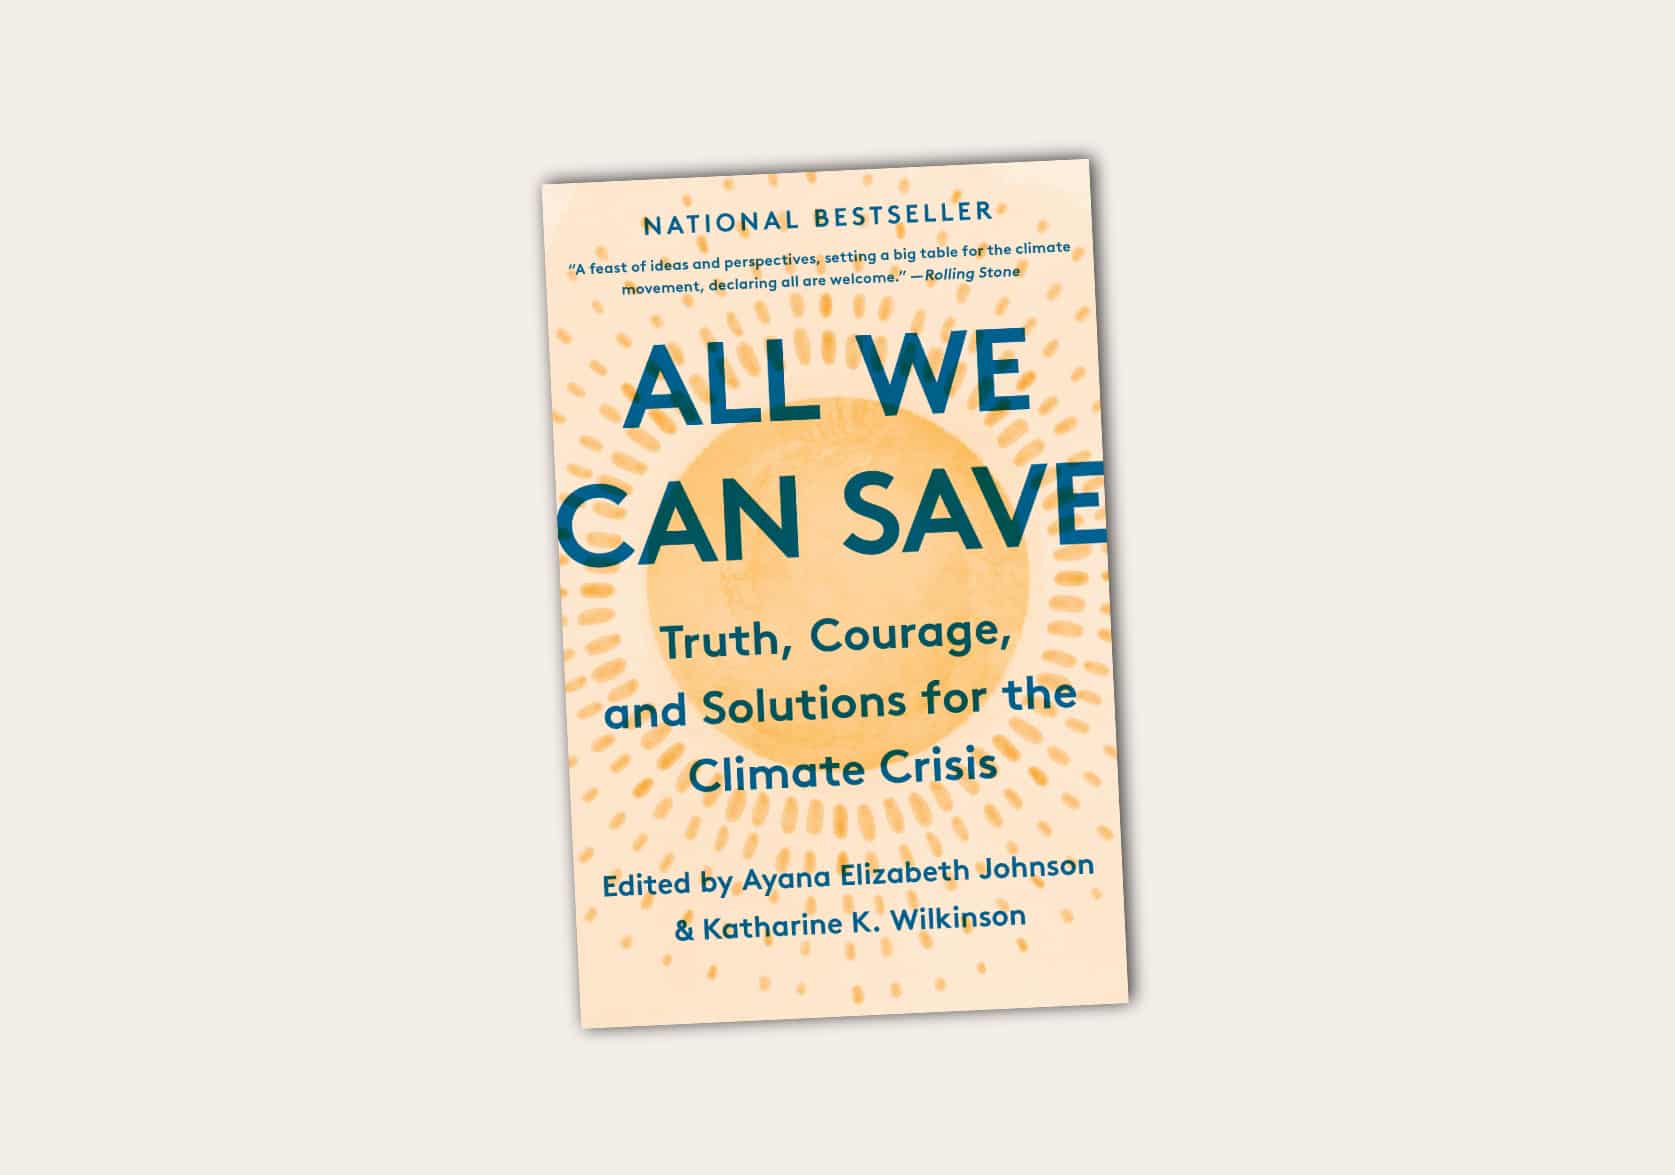 All We Can Save: Truth, Courage and Solution for the Climate Crisis edited by Ayana E. Johnson & Katherine K. Wilkinson